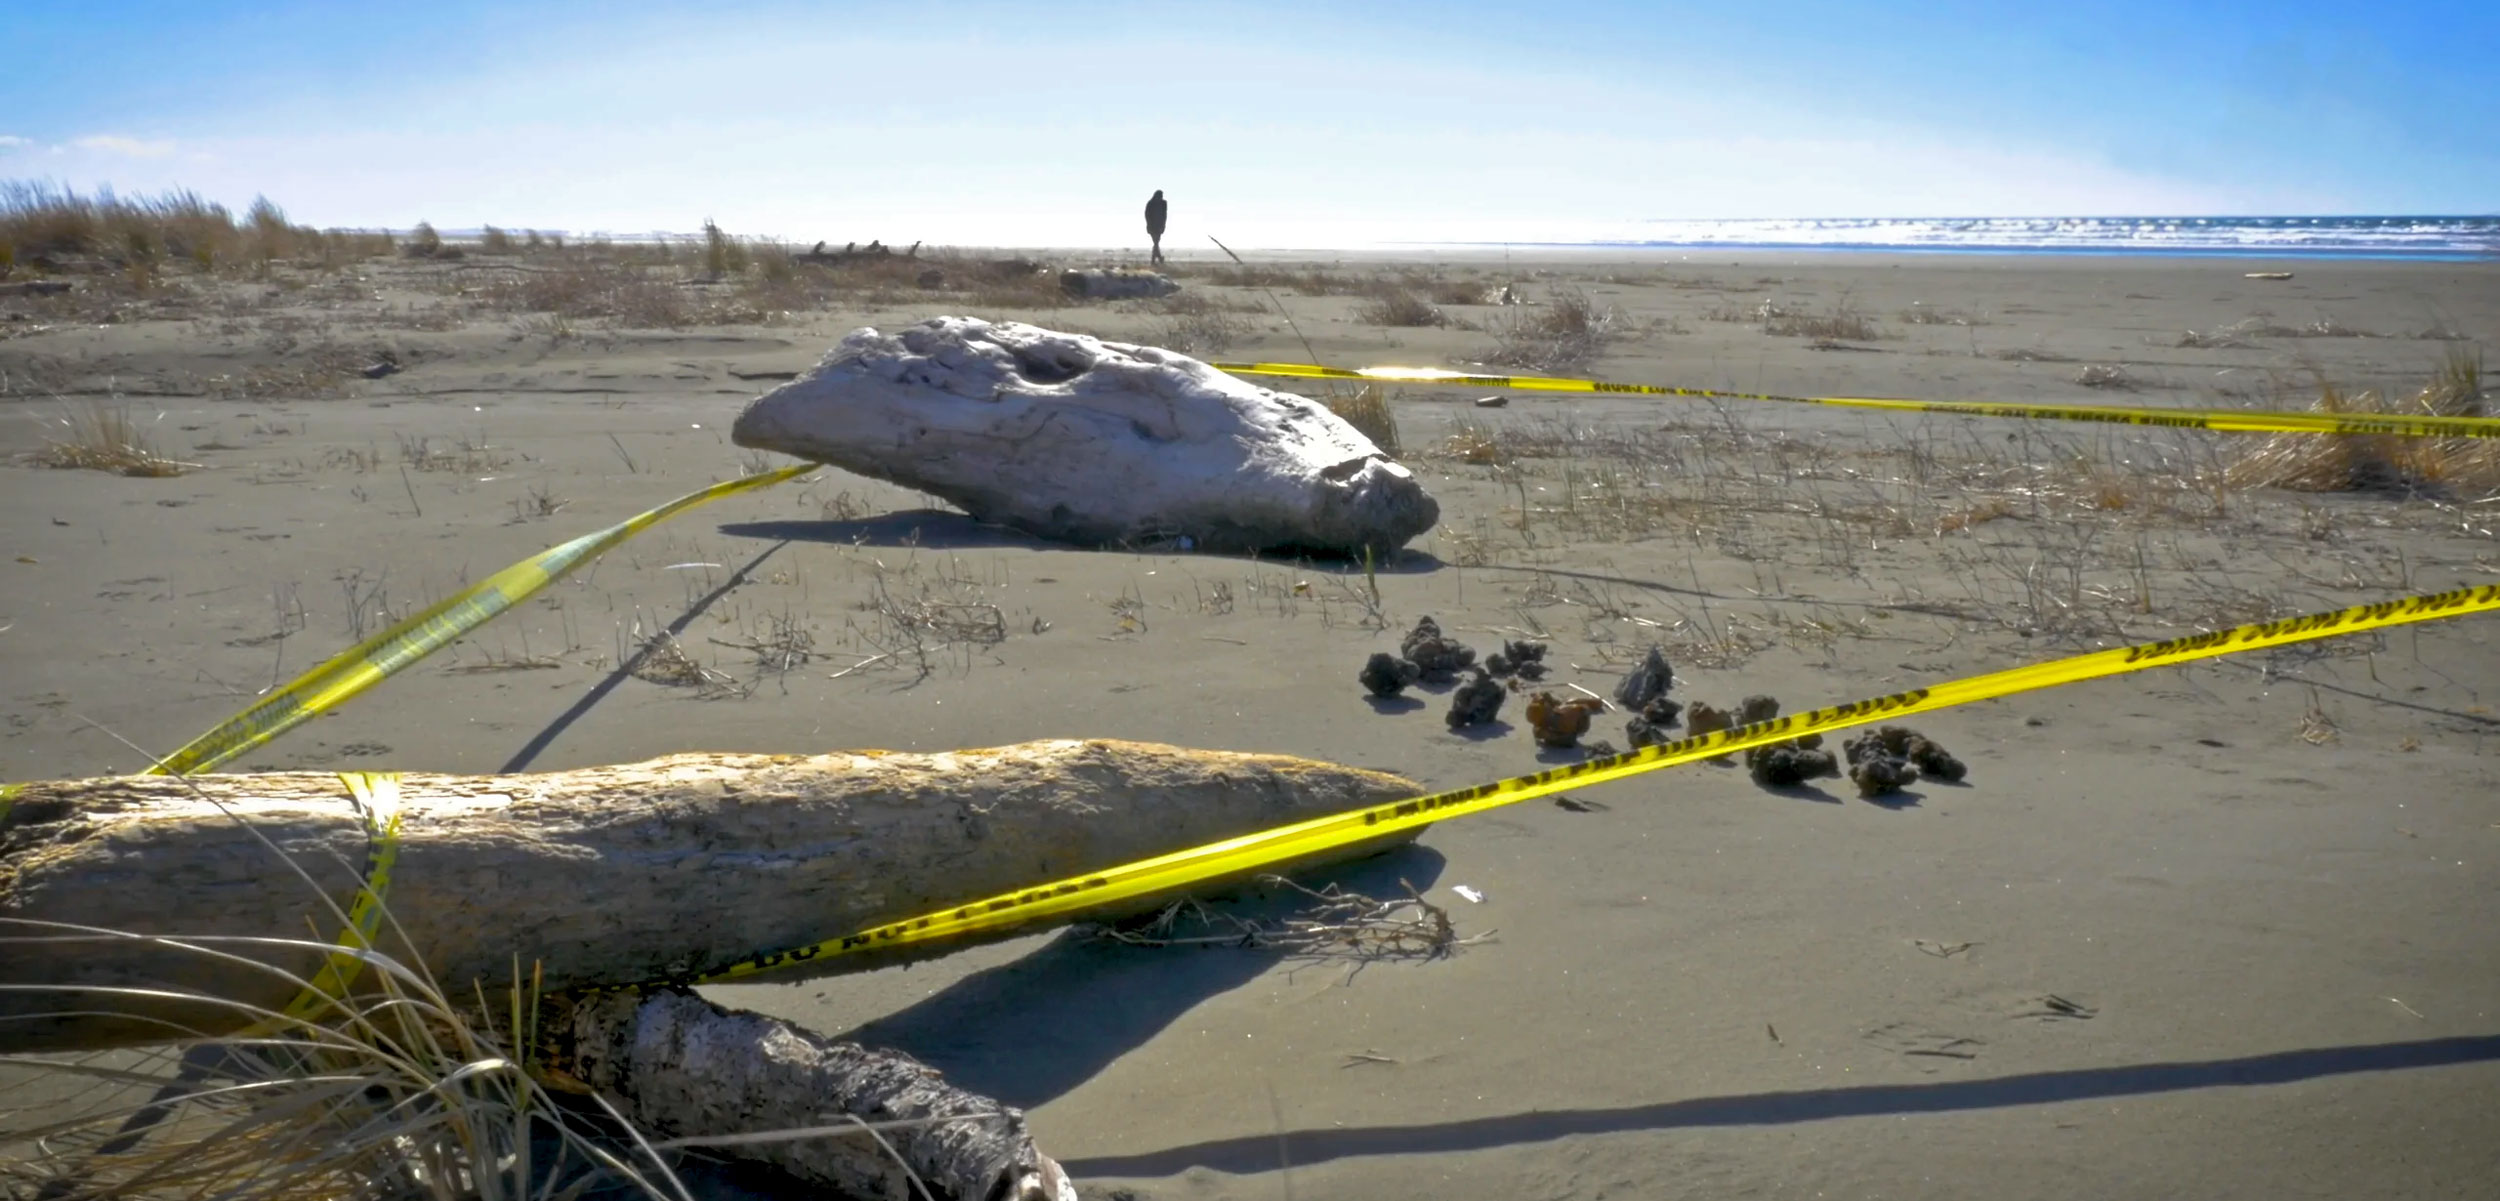 unexploded ordnances behind caution tape on the beach